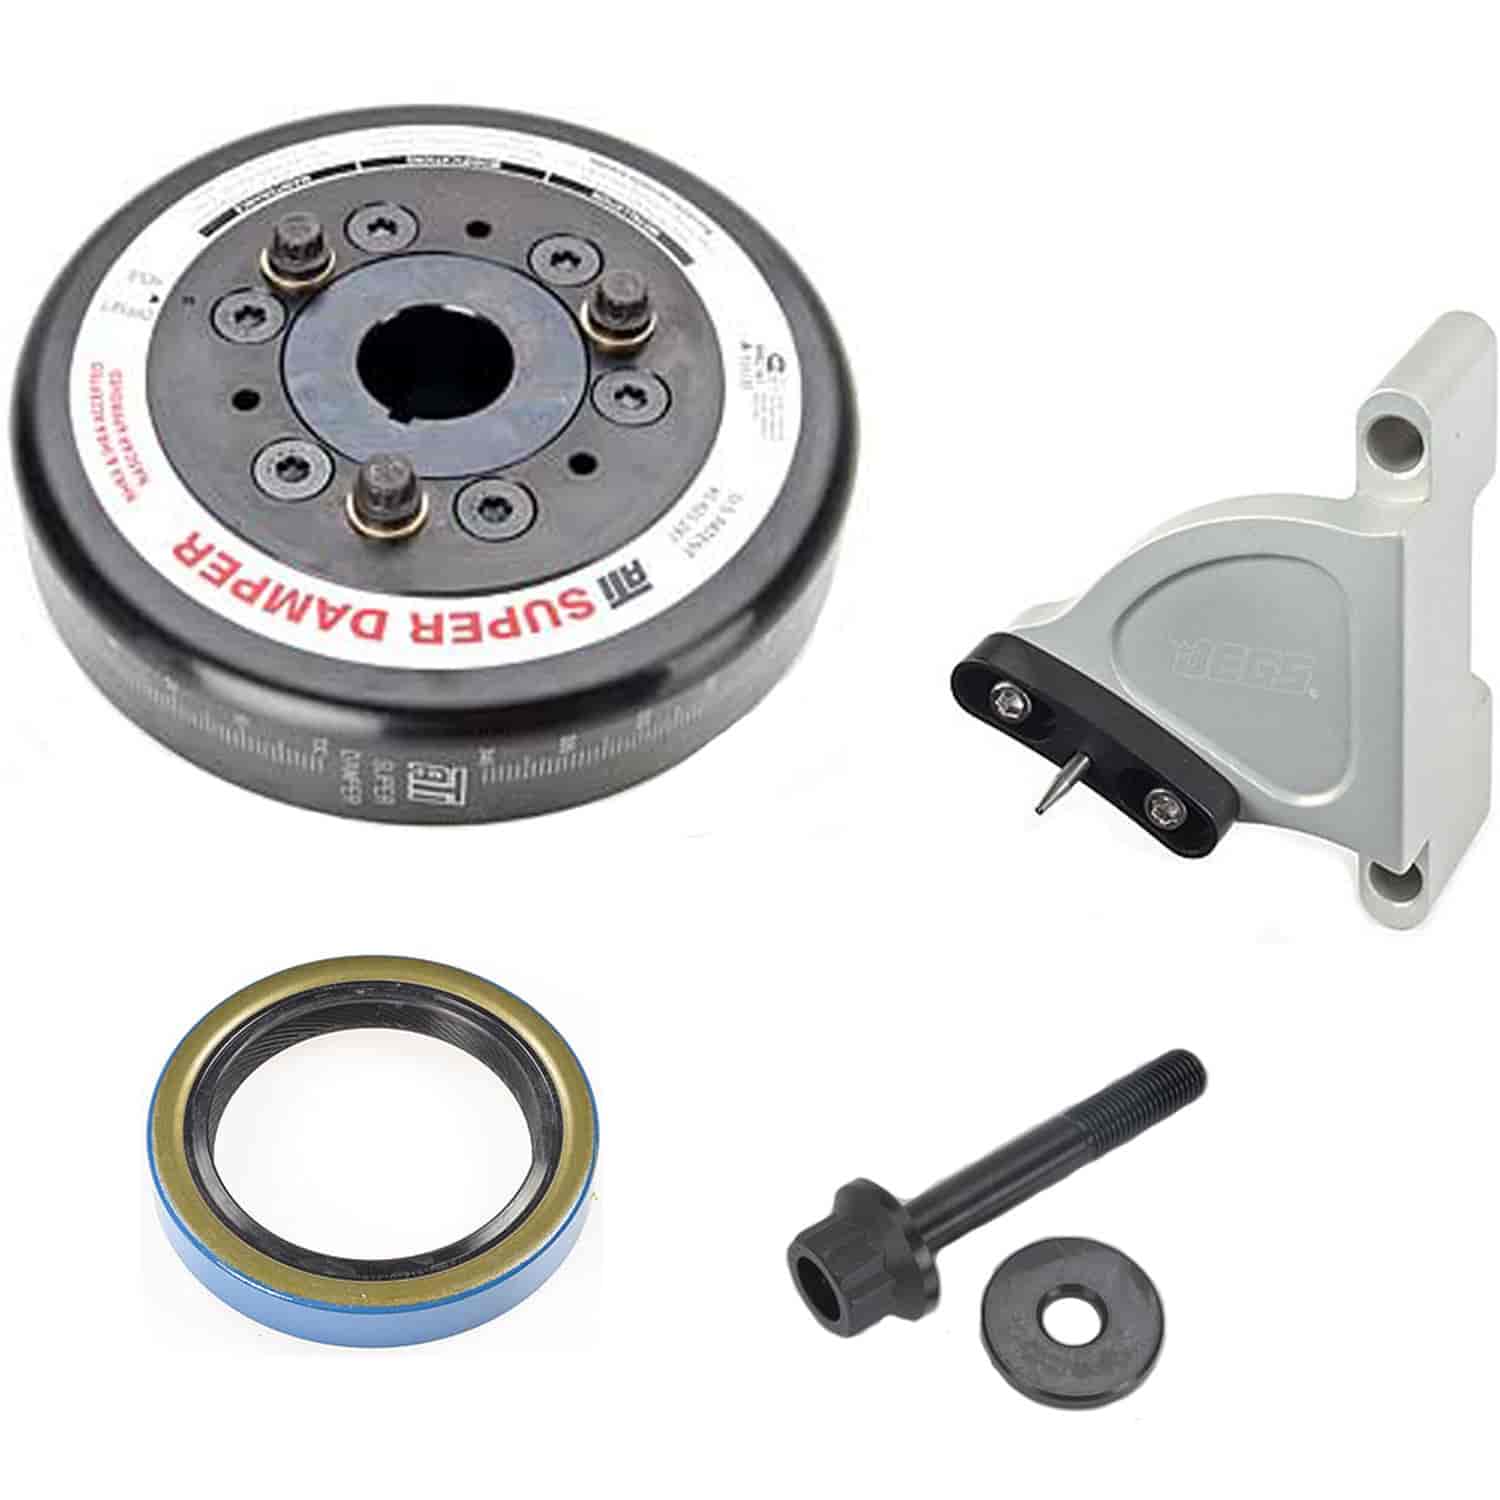 Super Damper Kit for Pontiac 2.5L and Small Block Chevy